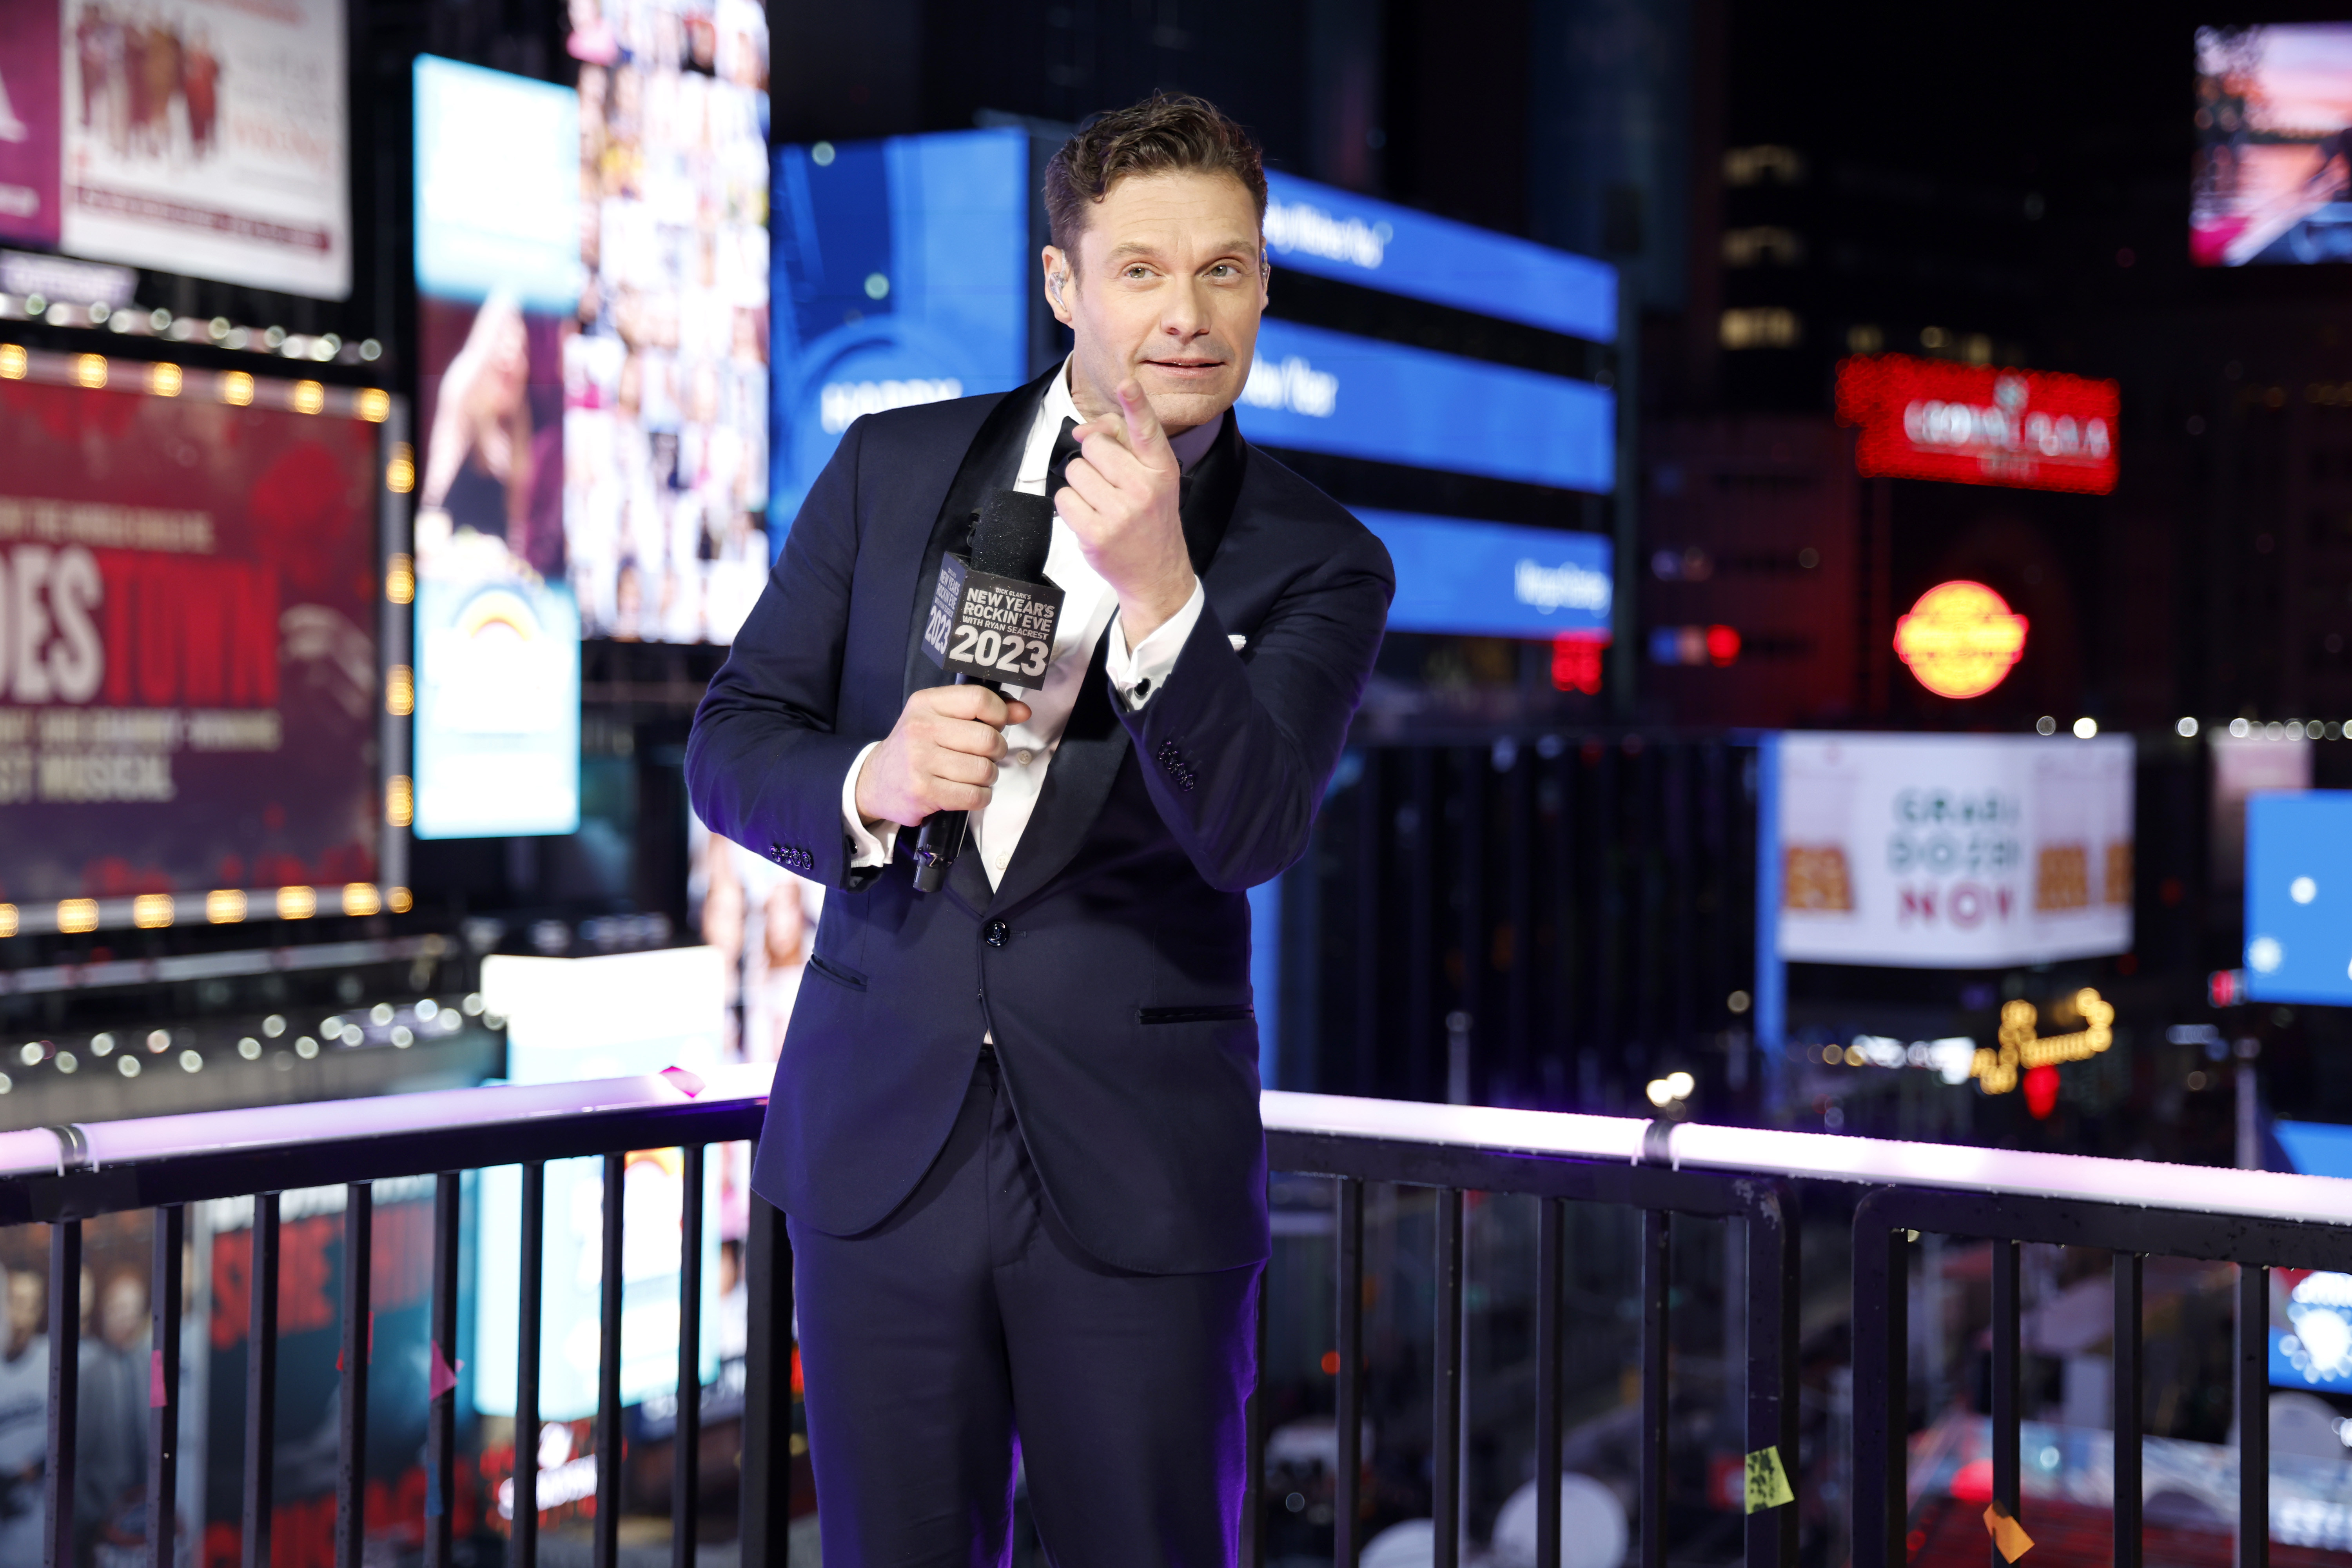 Ryan Seacrest speaks onstage during Dick Clark's New Year's Rockin' Eve With Ryan Seacrest 2023 on December 31, 2022, in New York City. | Source: Getty Images